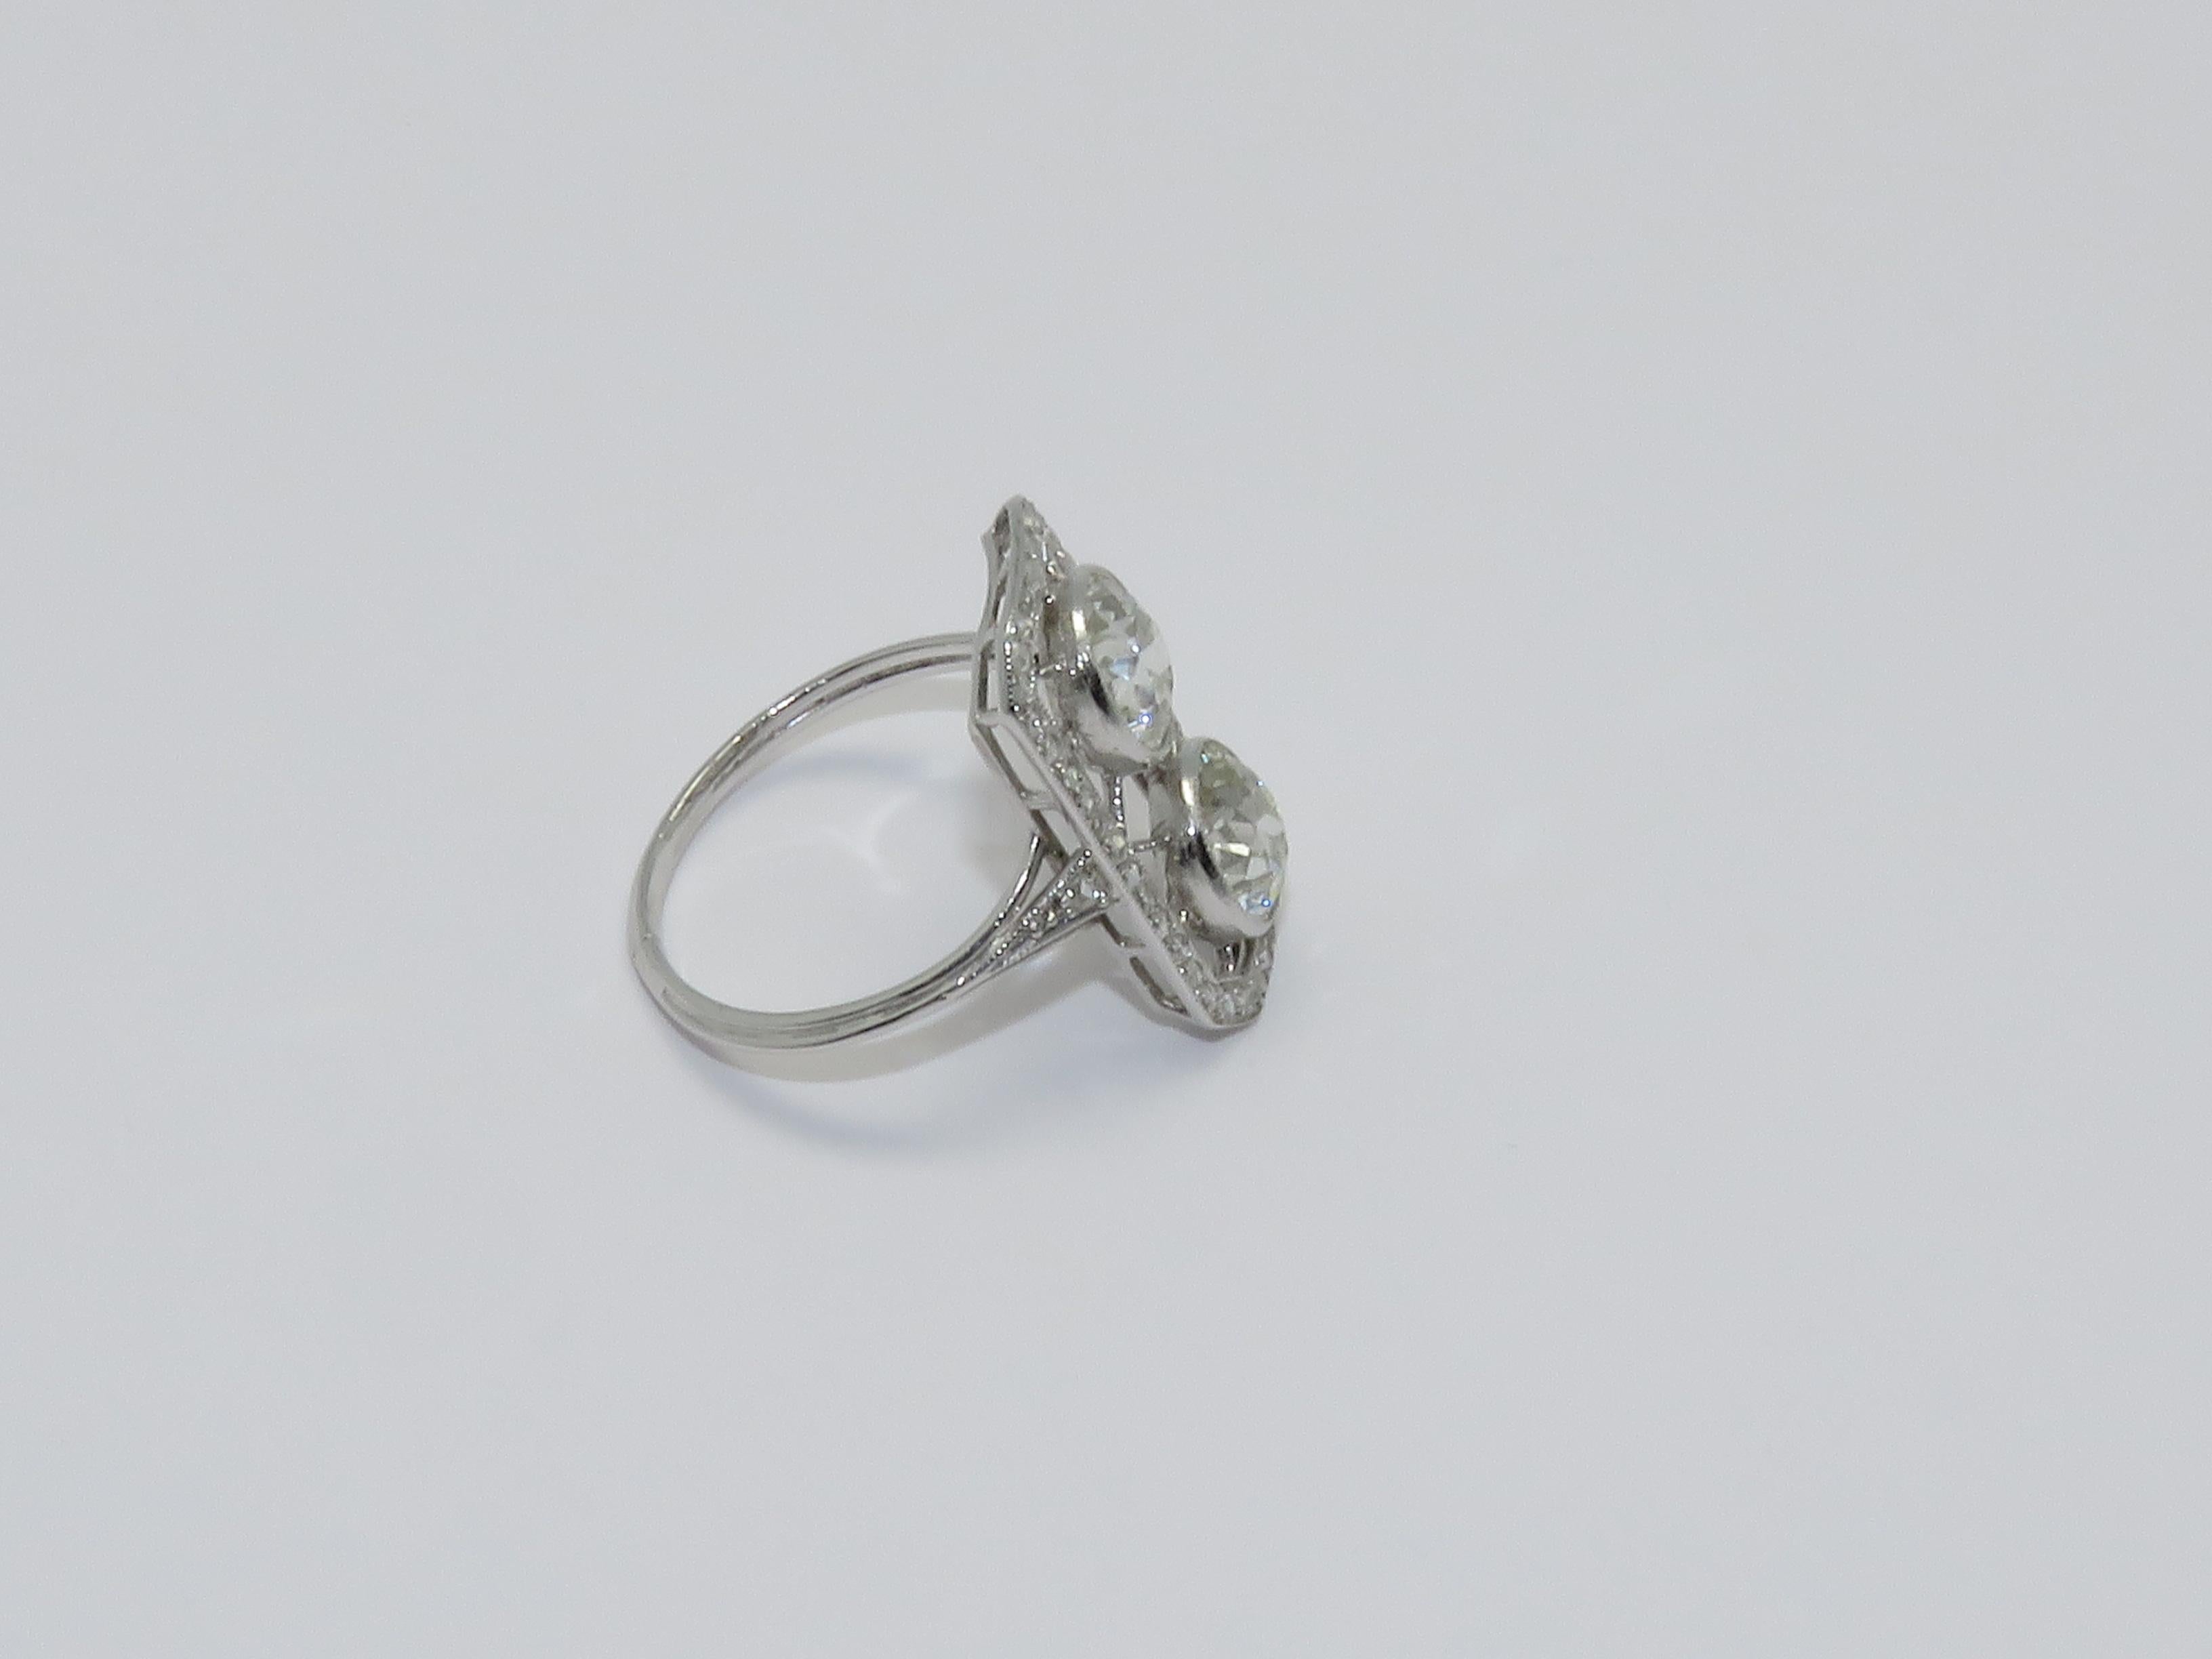 Art Deco bypass ring in Diamonds and Platinum.
Diamond Old European Cut Diamond approximately: 2 x 1.40 Ct

Ring size: 56      7 1/4 US

Measurements:
Length: 0.83 in ( 2.10 cm )     Width: 0.47 in ( 1.20 cm )     Height: 0.87 in ( 2.20 cm )    